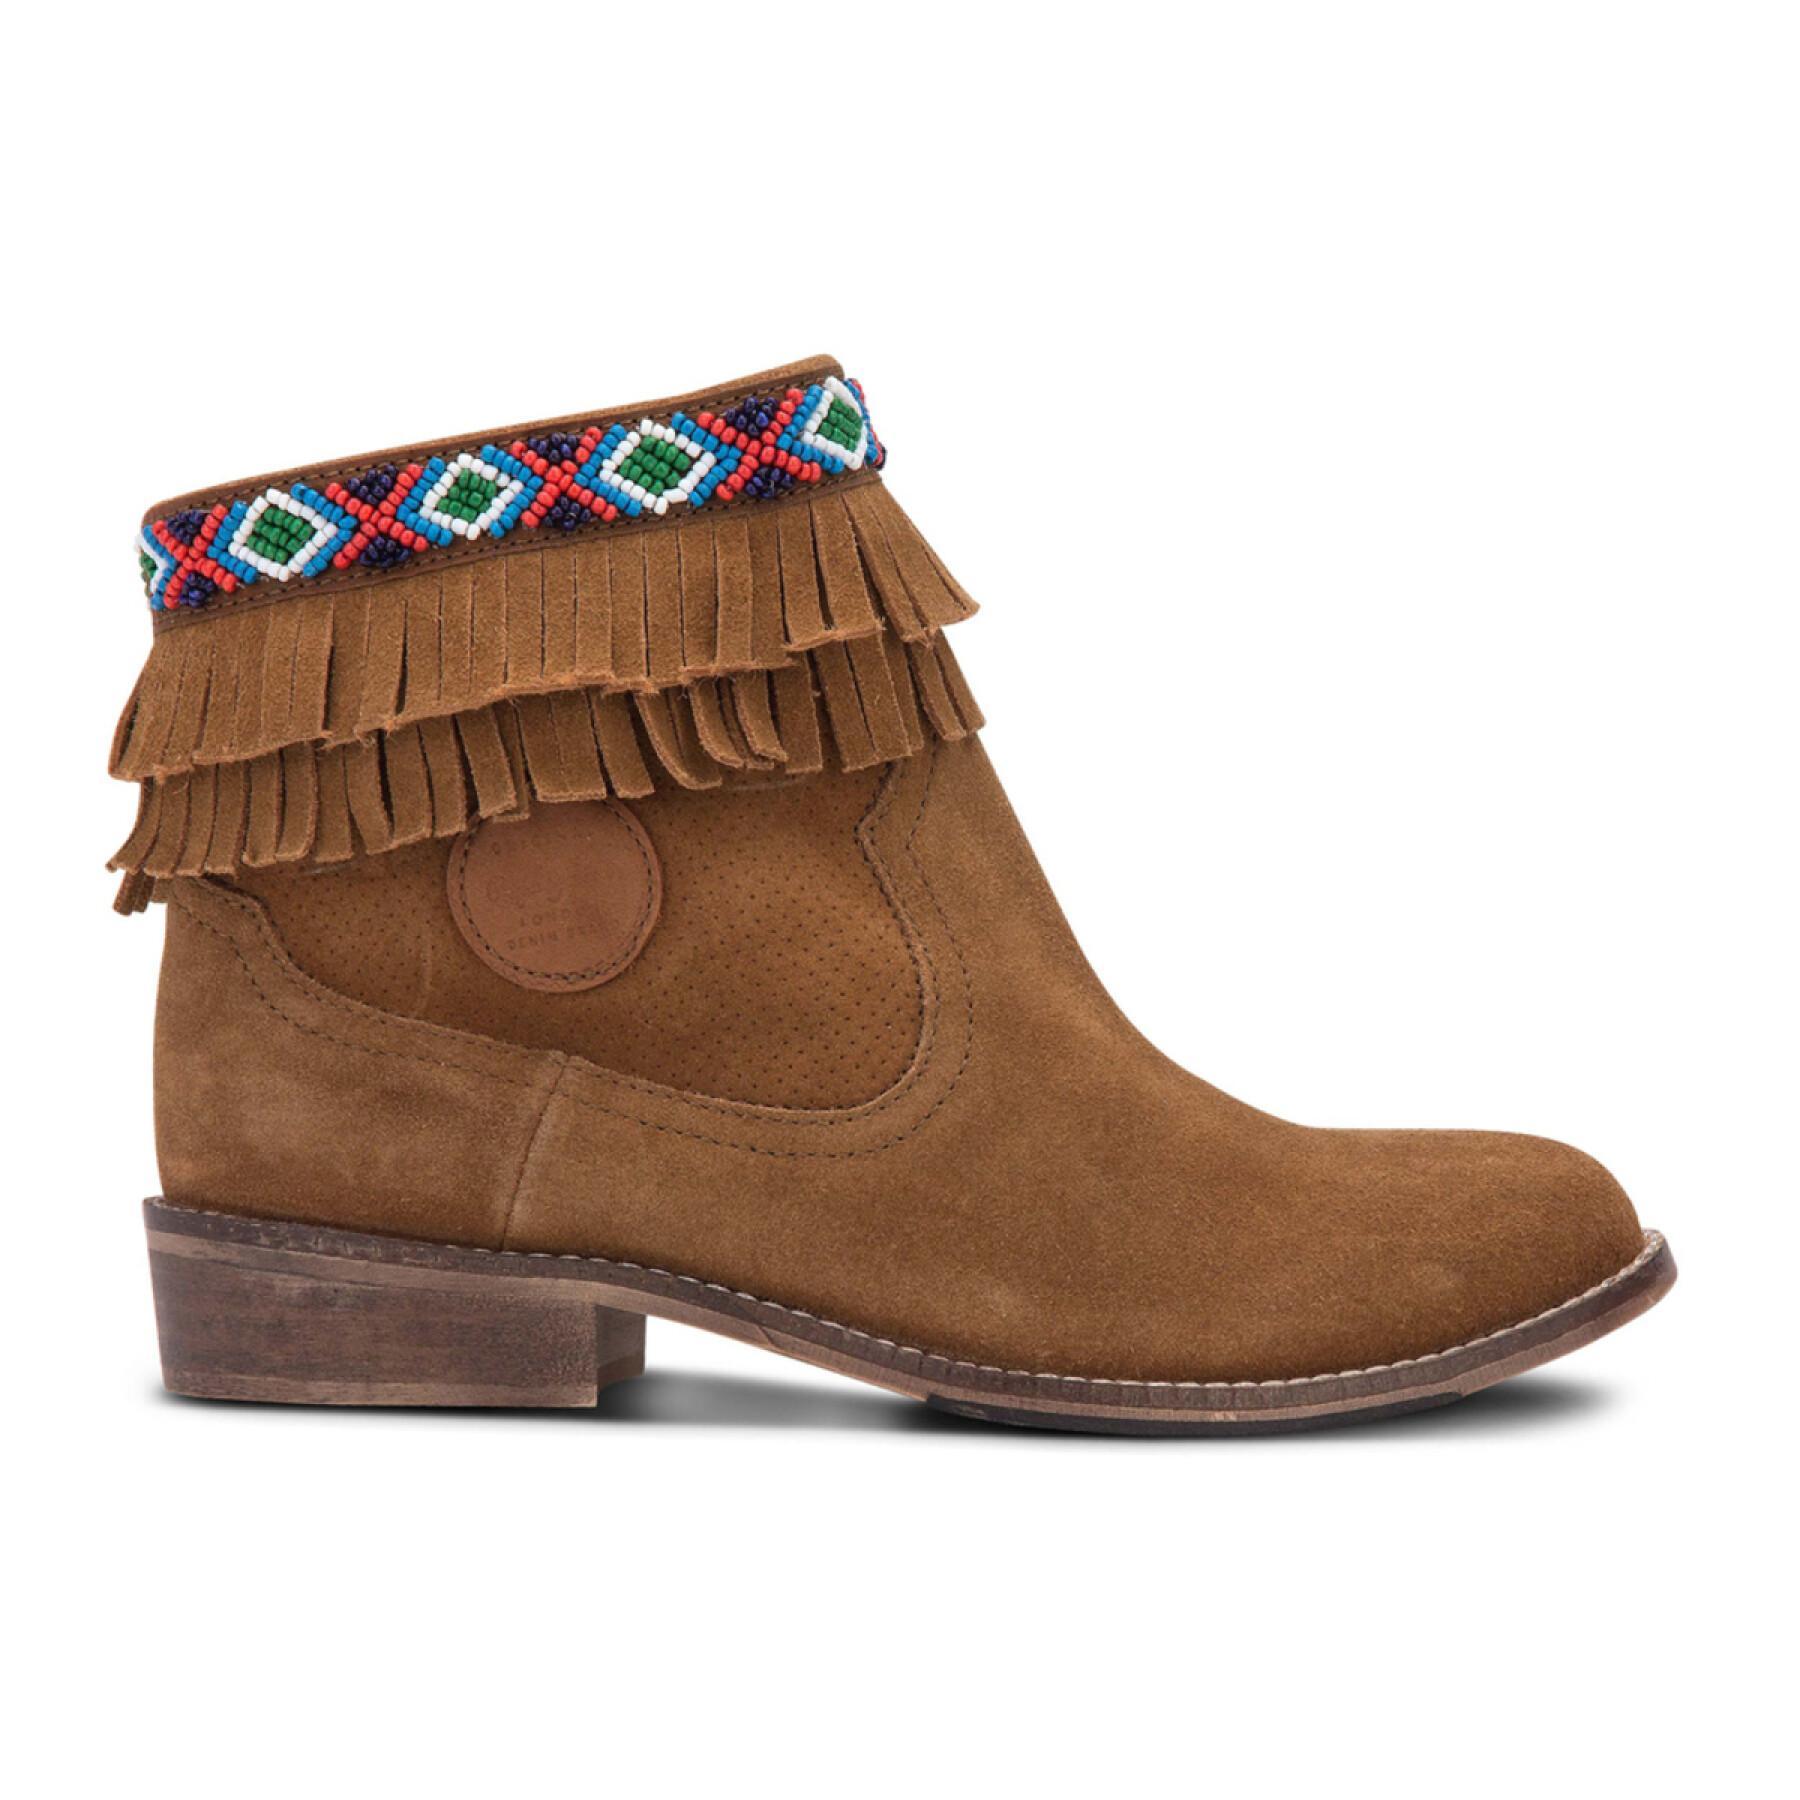 Girl's boots Pepe Jeans Bowie Fringes